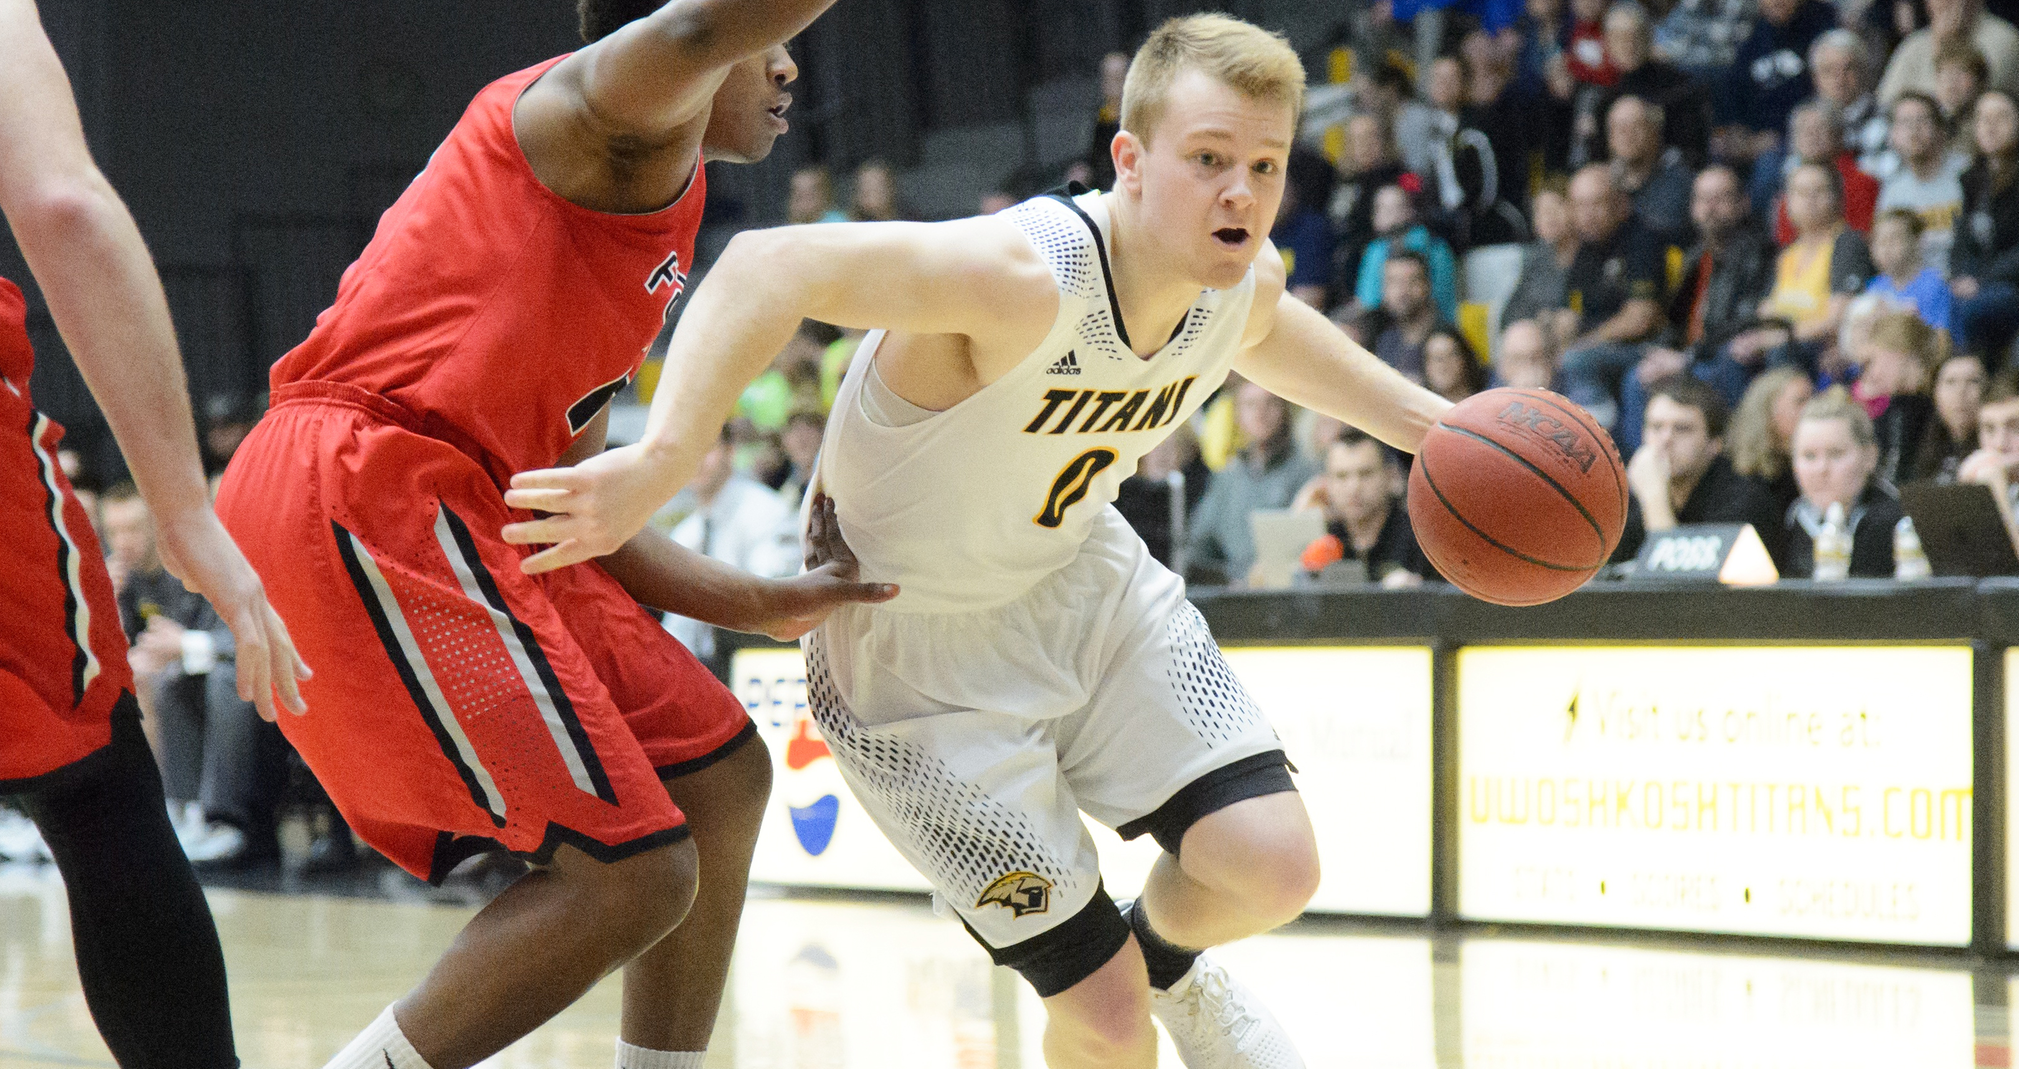 Charlie Noone scored 18 points while collecting seven rebounds against the Knights.